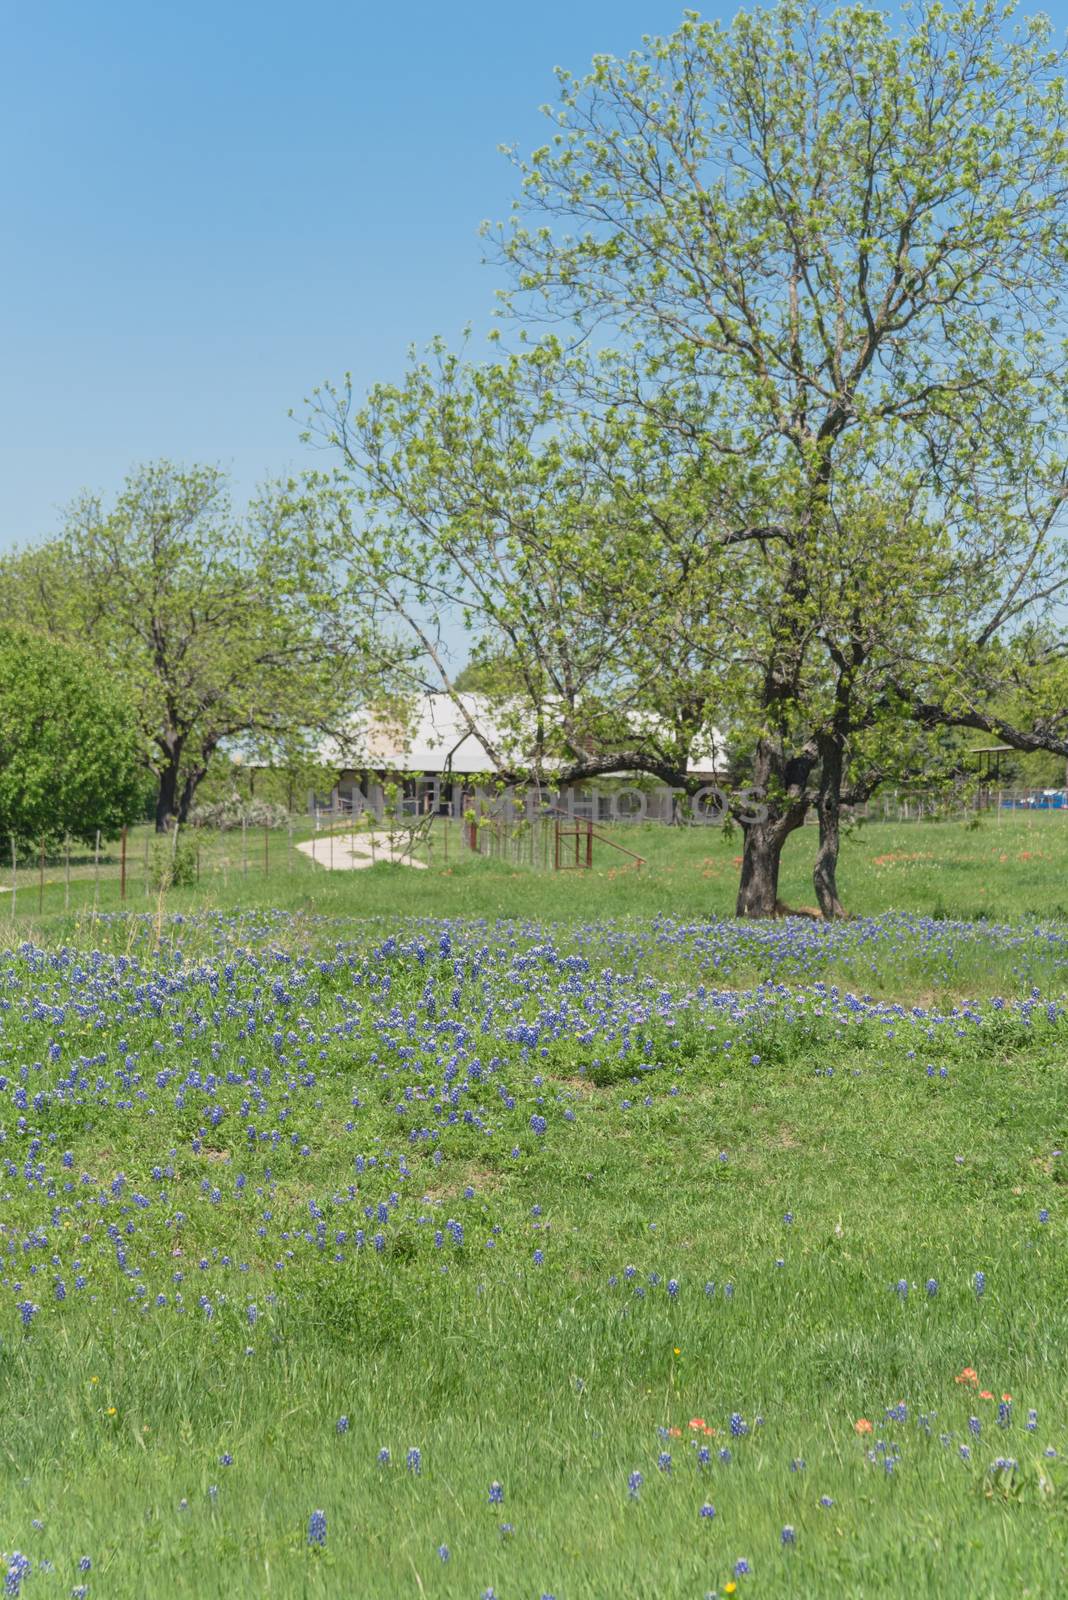 Scenic rural landscape from Bristol, Texas during springtime with blossom Bluebonnet wildflower